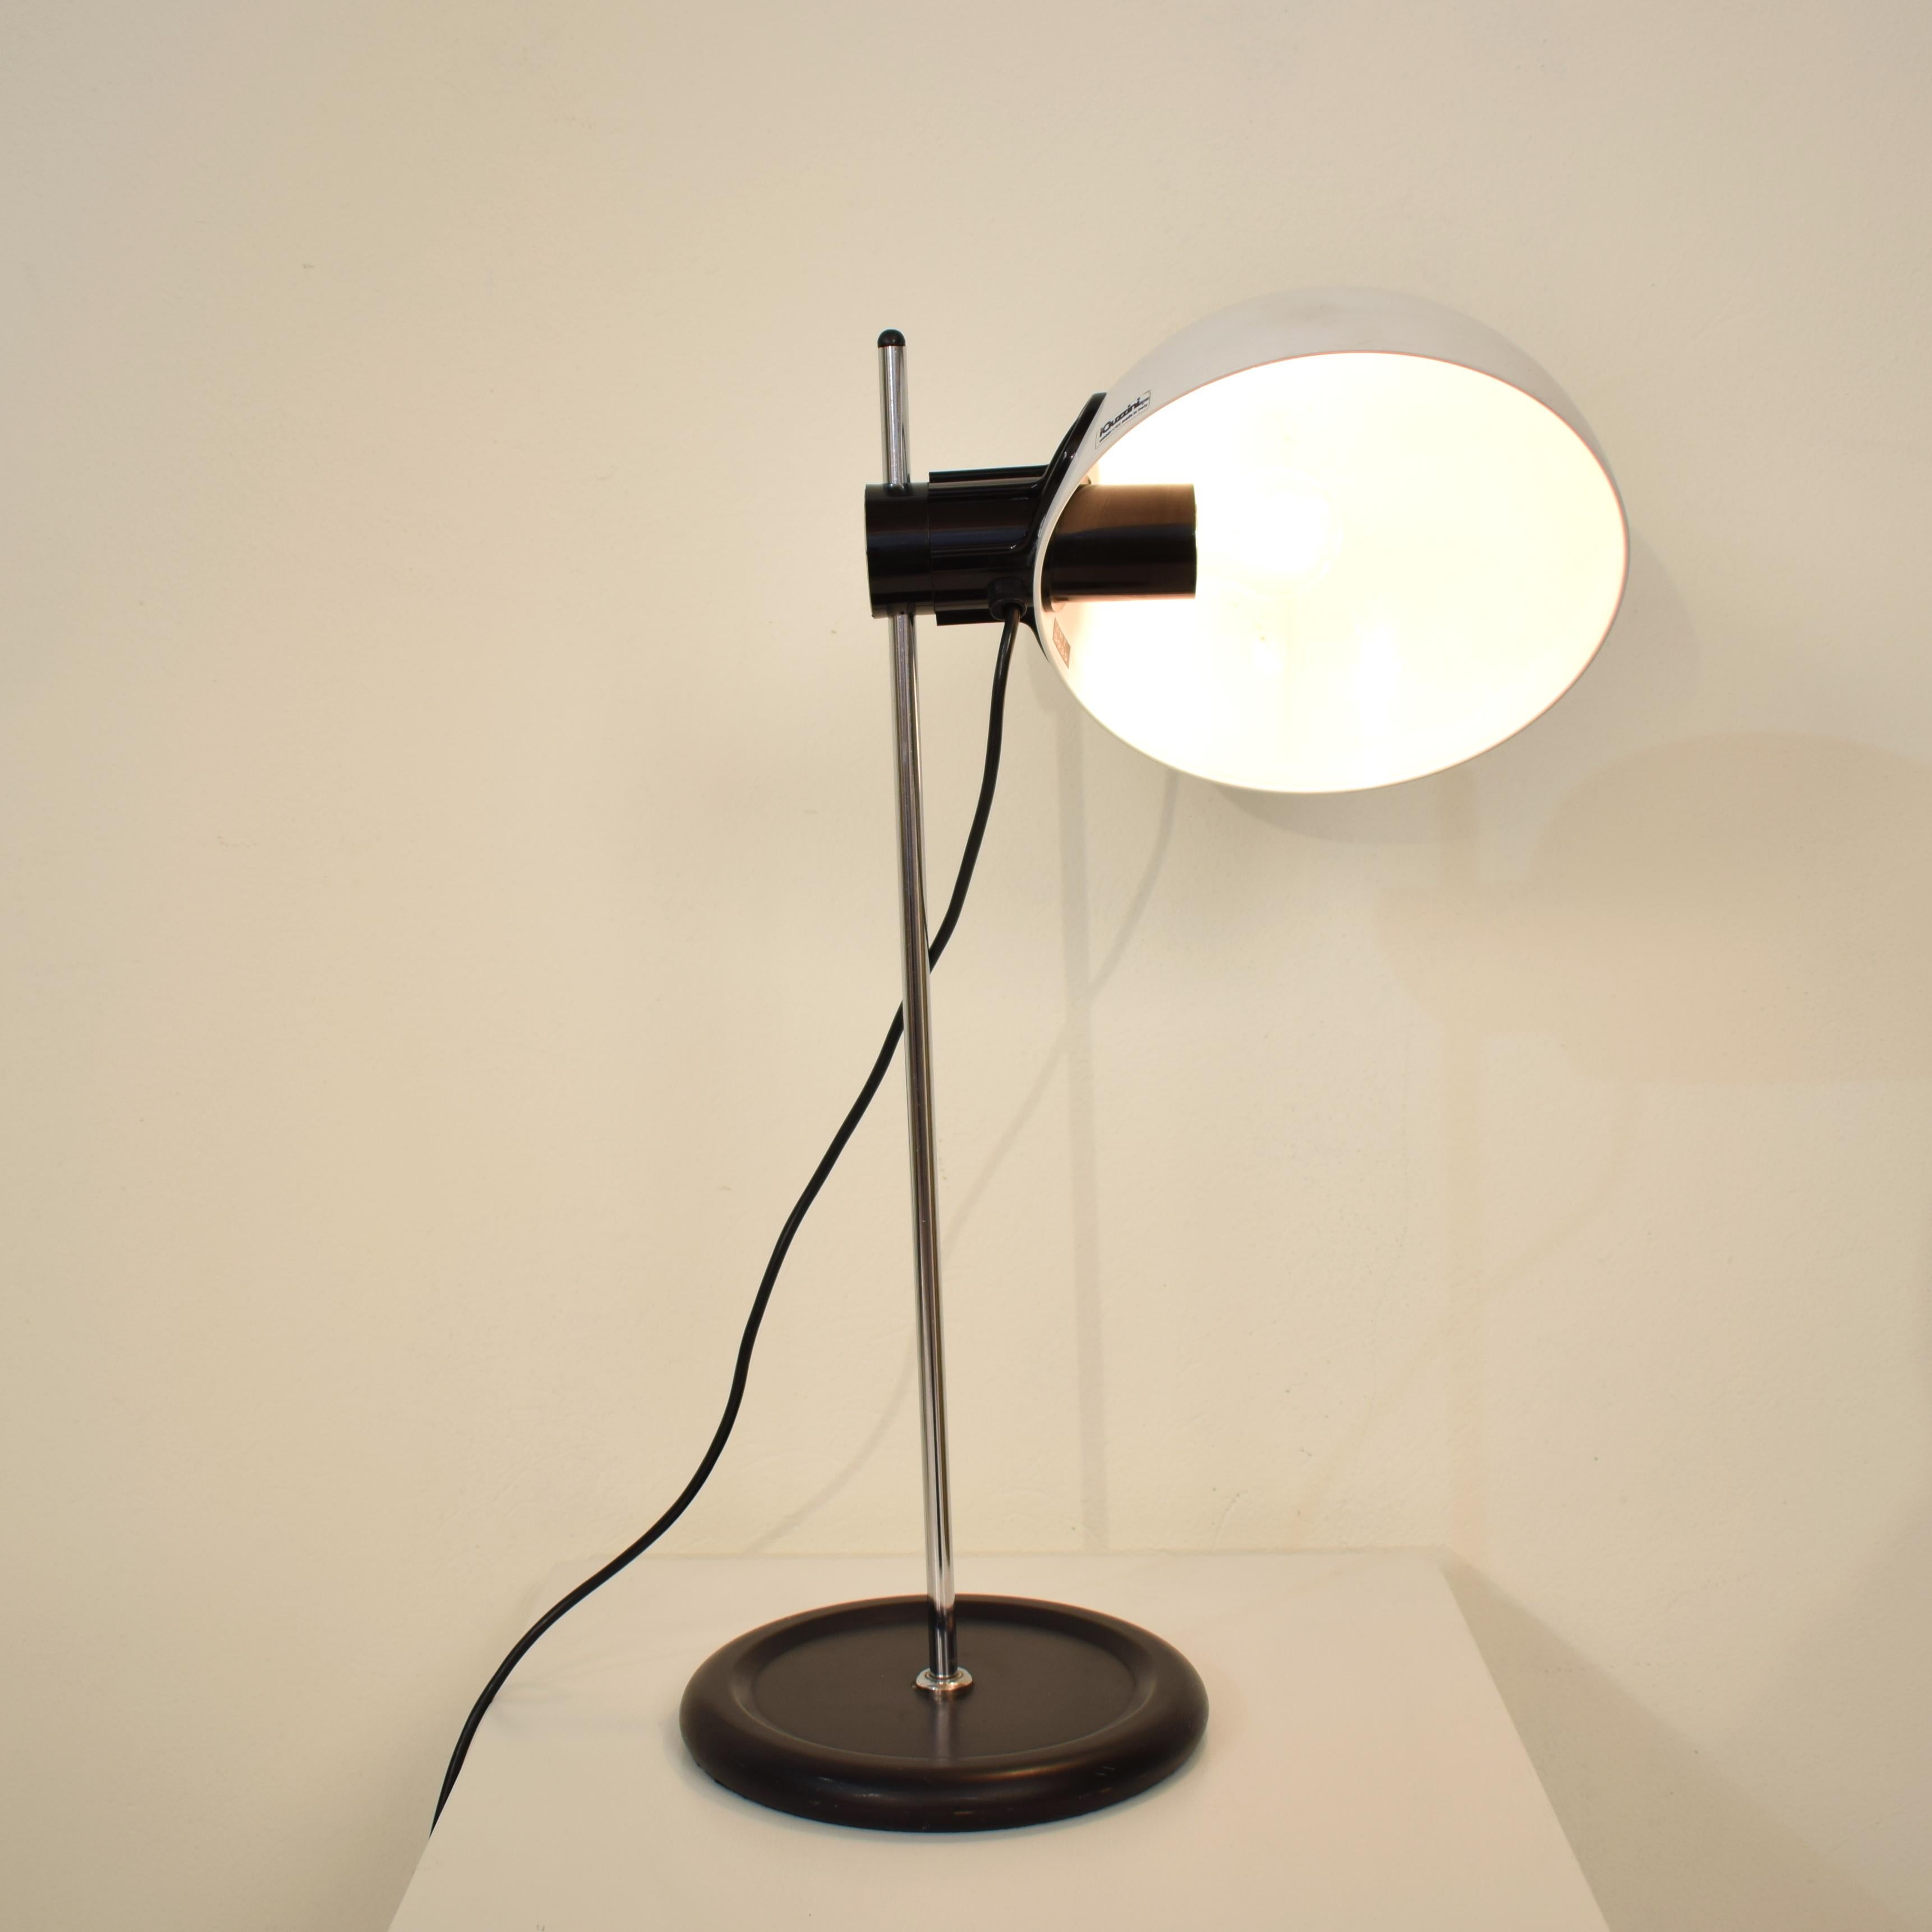 Italian Midcentury Black and White Table Lamp Model Libellula by Harvey Guzzini, 1970s For Sale